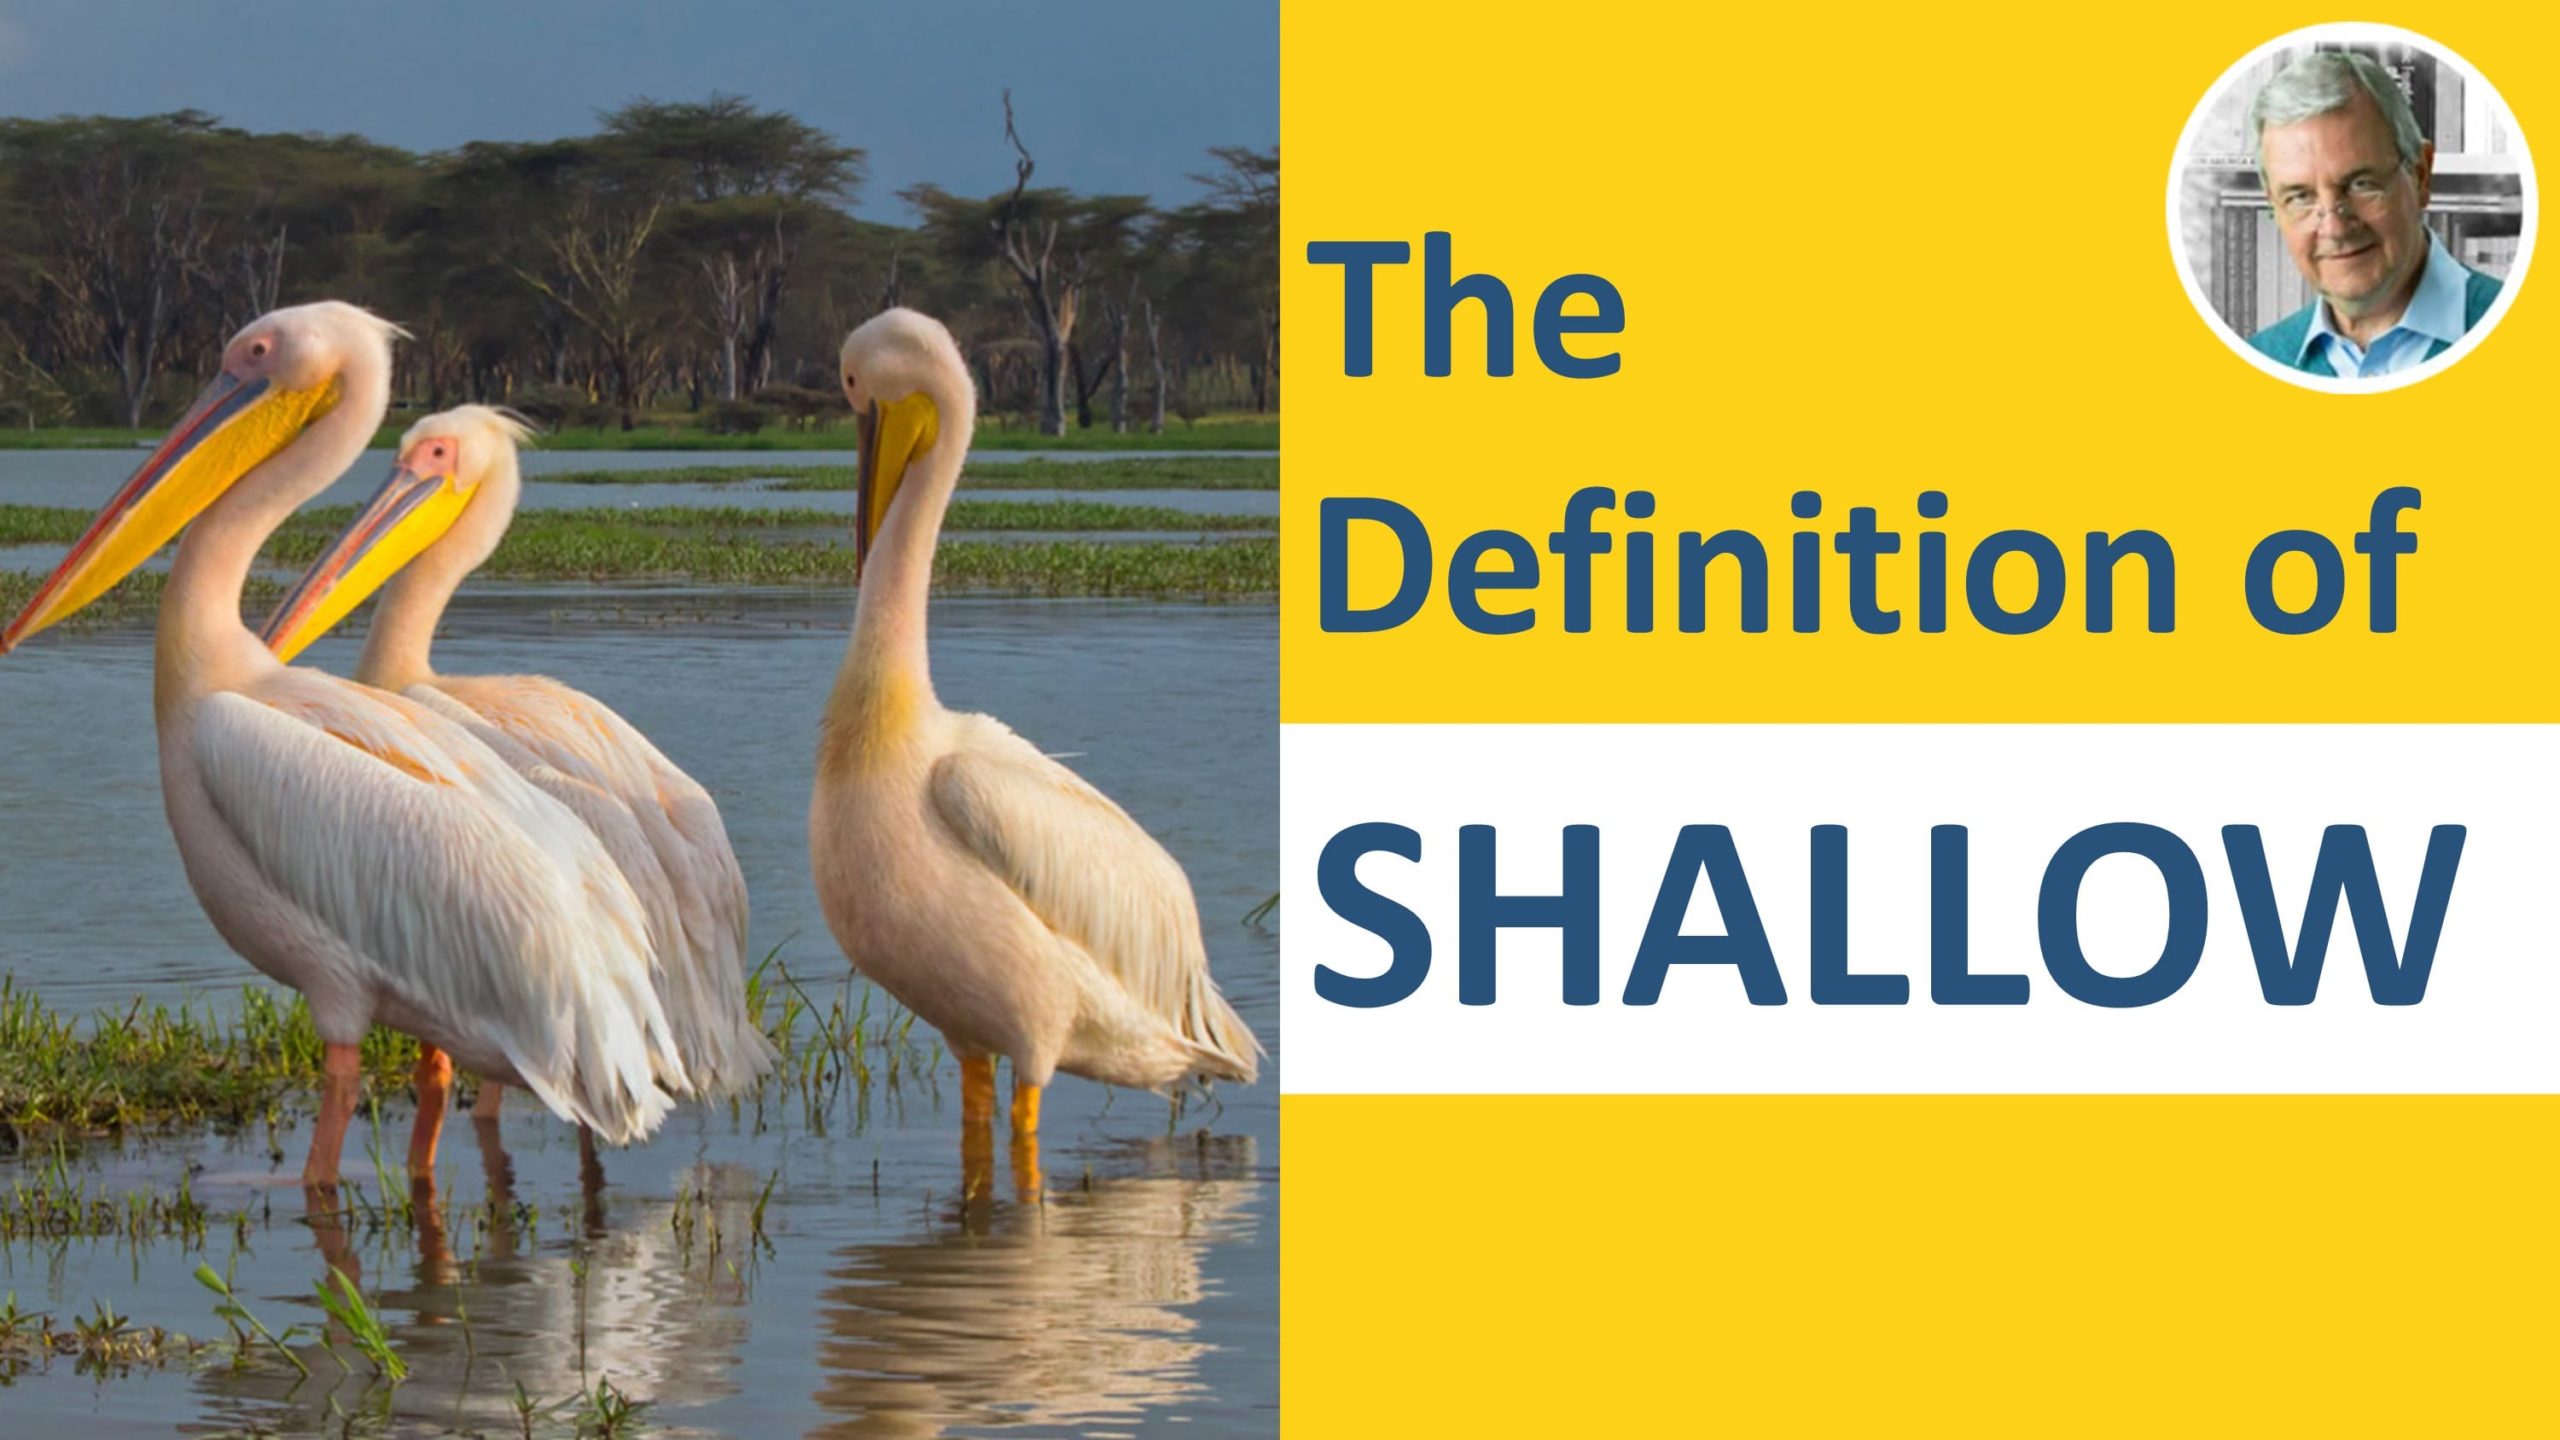 meaning of shallow - shallow in a sentence